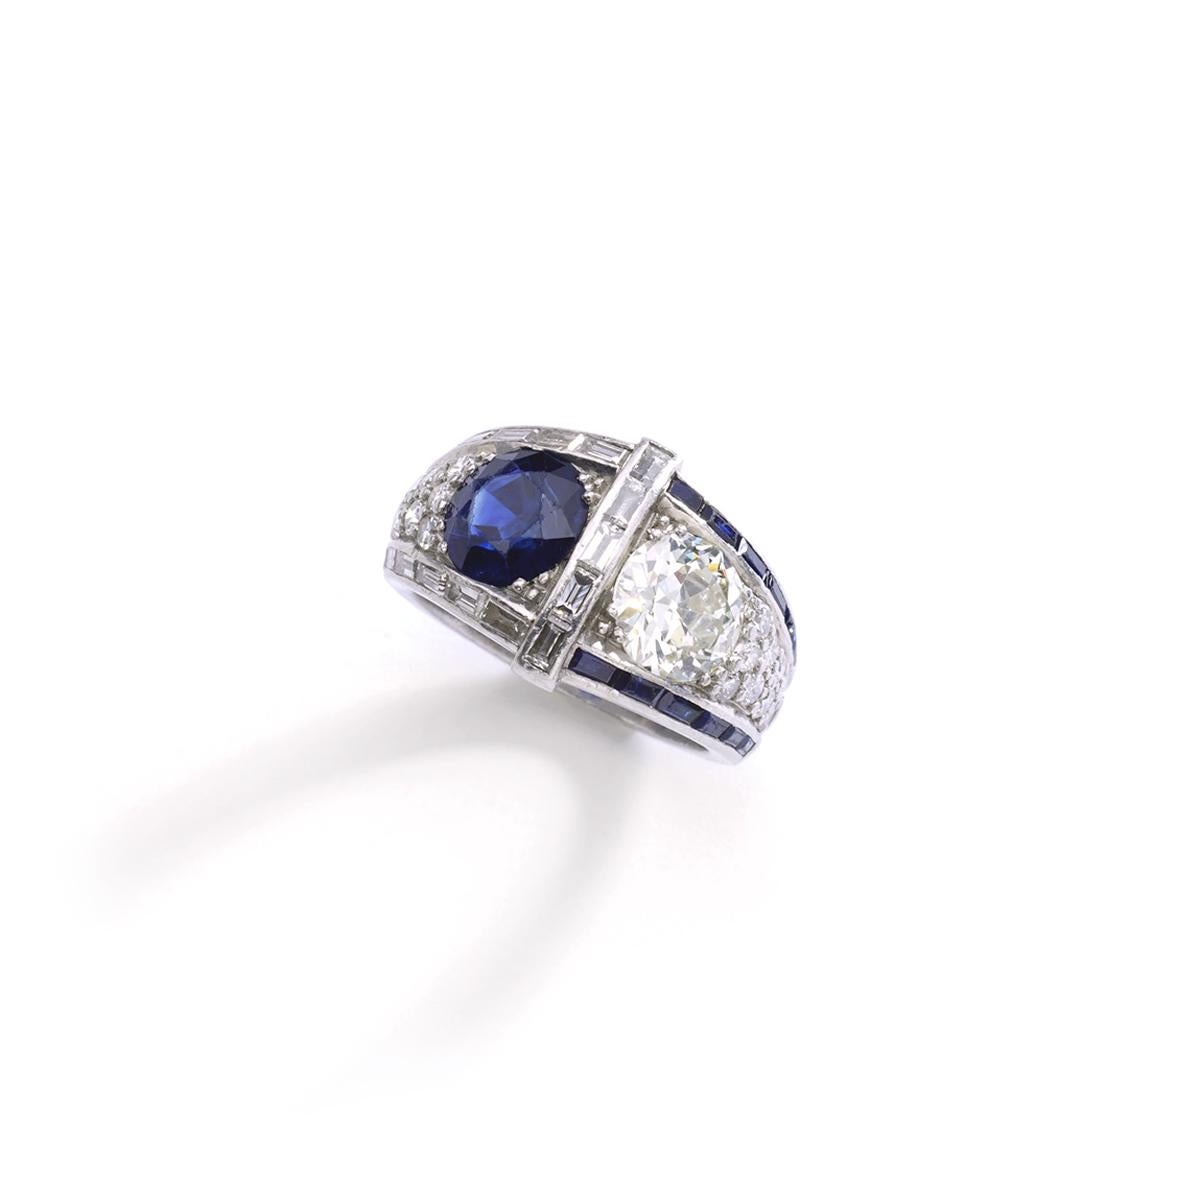 Art Deco Diamond Round and Baguette cut, Sapphire Round and calibrated on Platinum Ring.
Circa 1930.